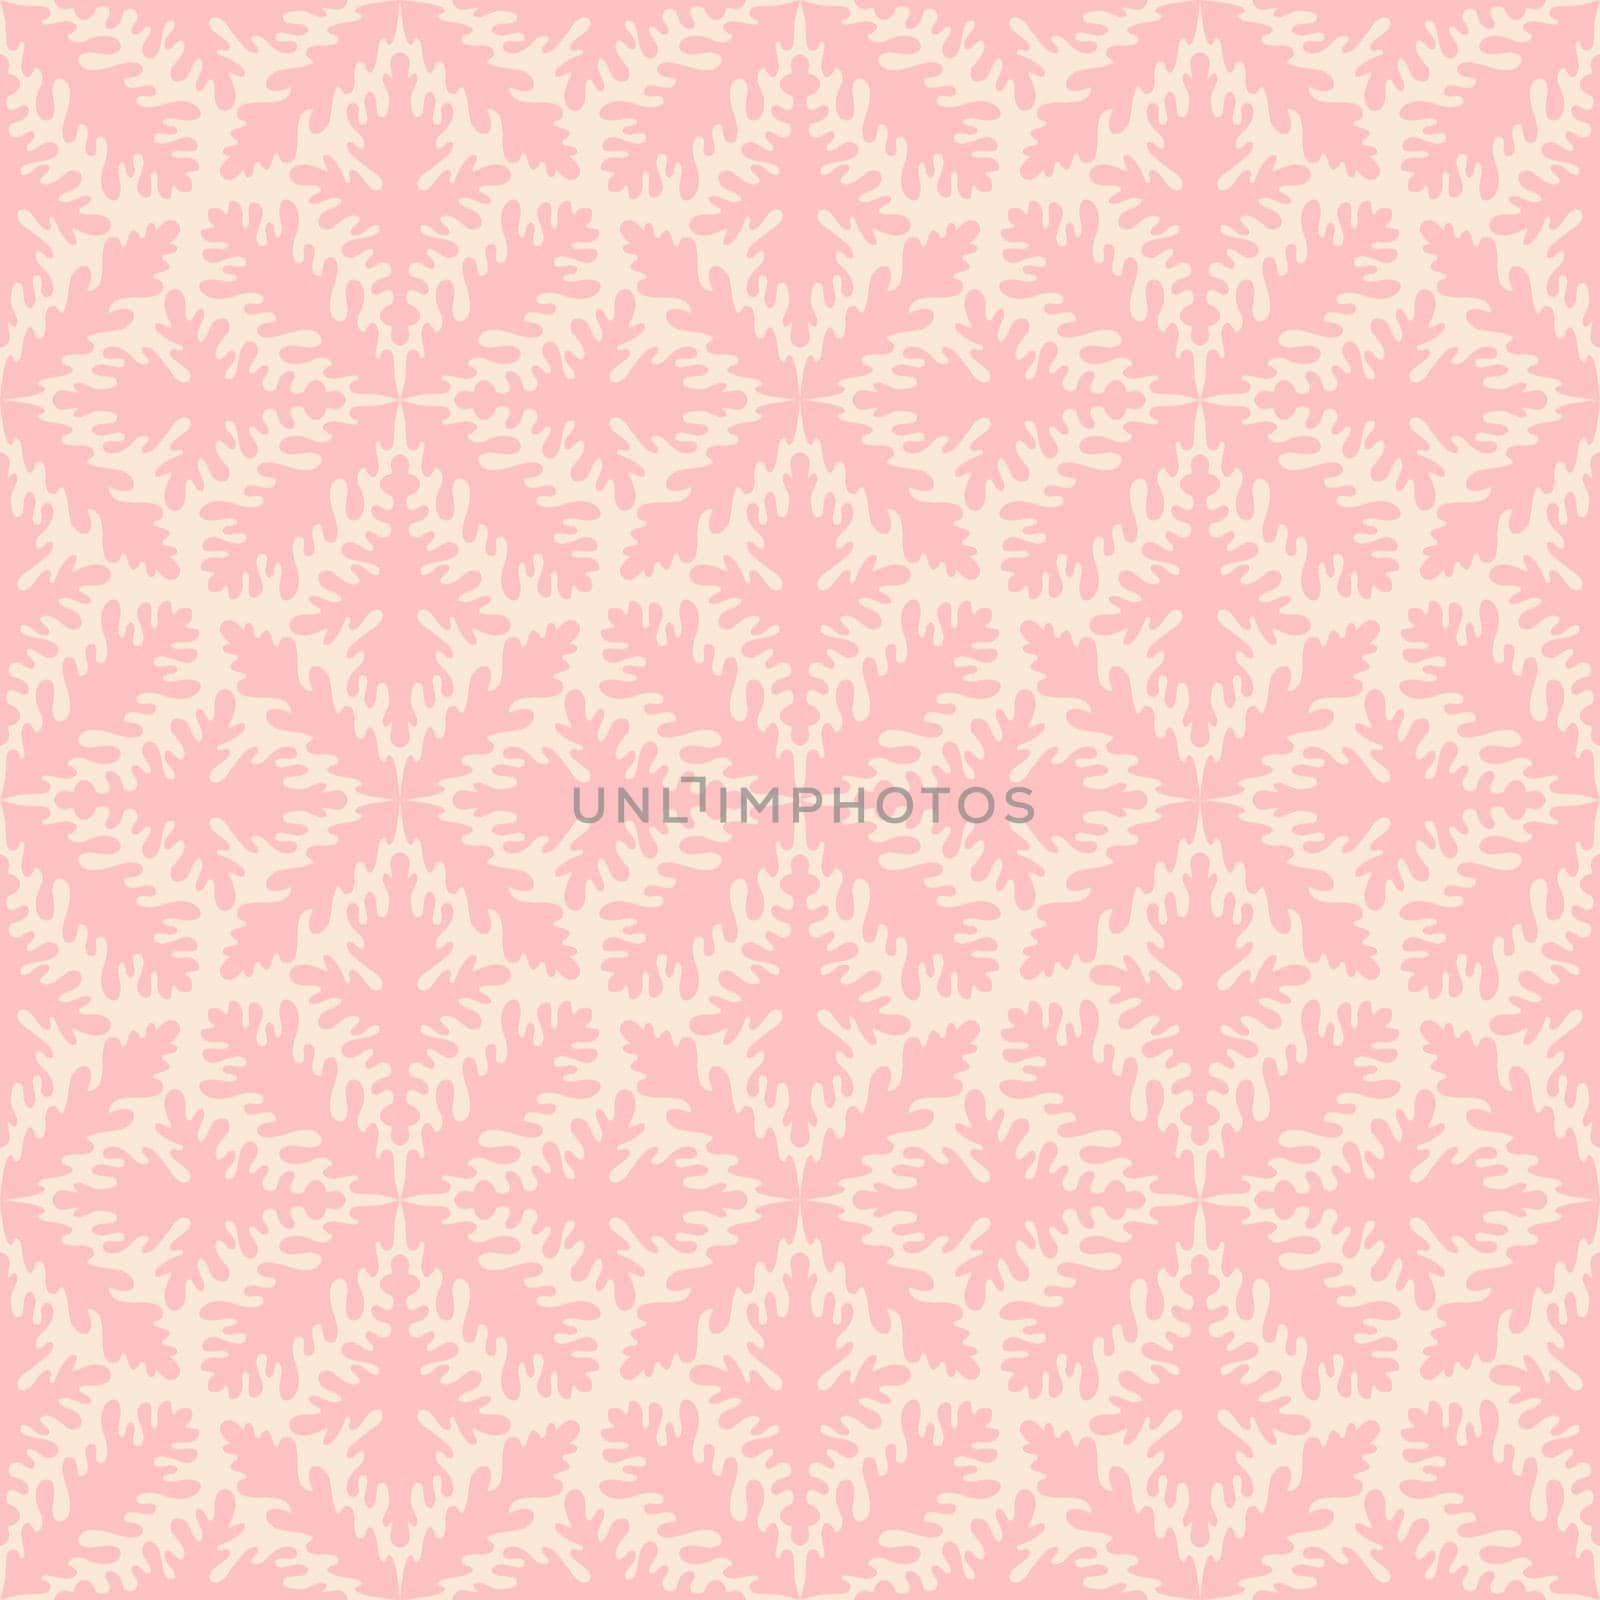 Abstract pink background with floral hand drawn element. Geometric seamless pattern for wallpaper, web page, textures, fabric, textile. Decorative vector illustration. by allaku